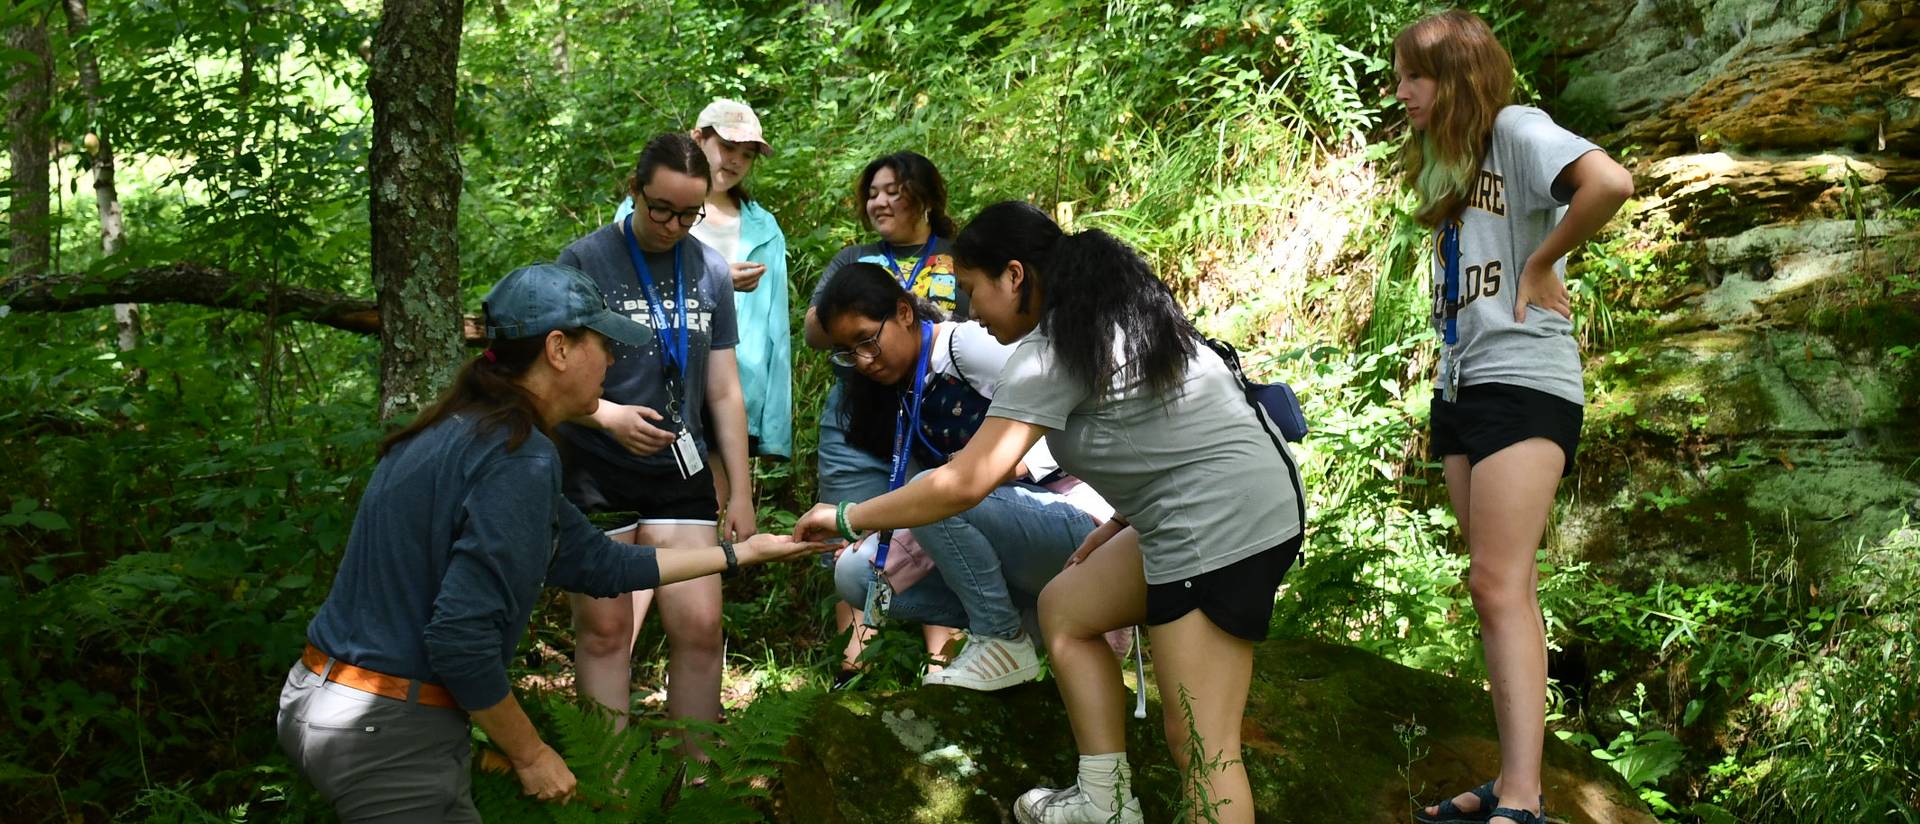 A group of students looking at artifacts in the woods